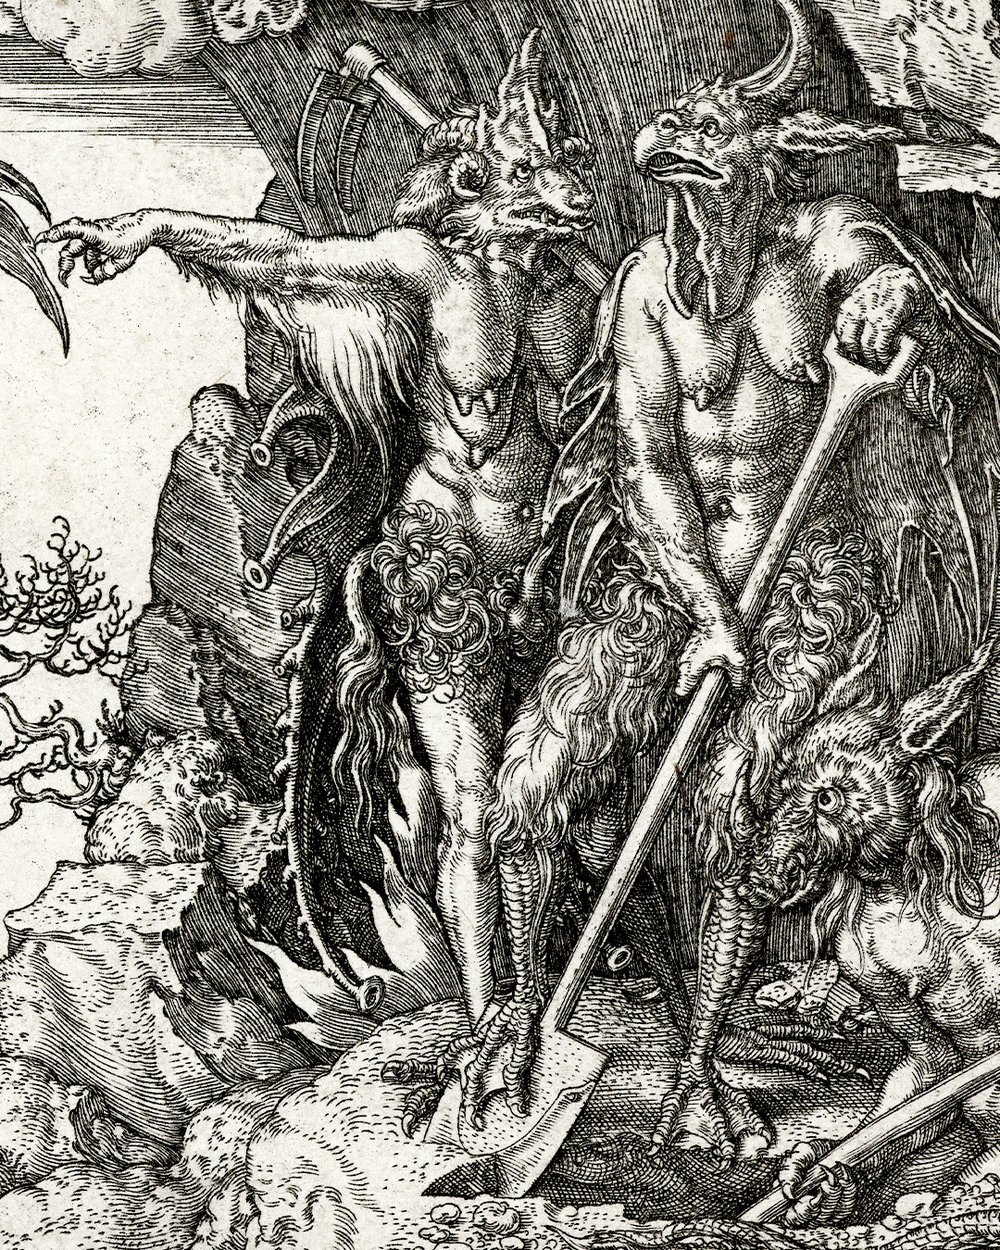 "The rich man is led to hell by demons" (1554) 